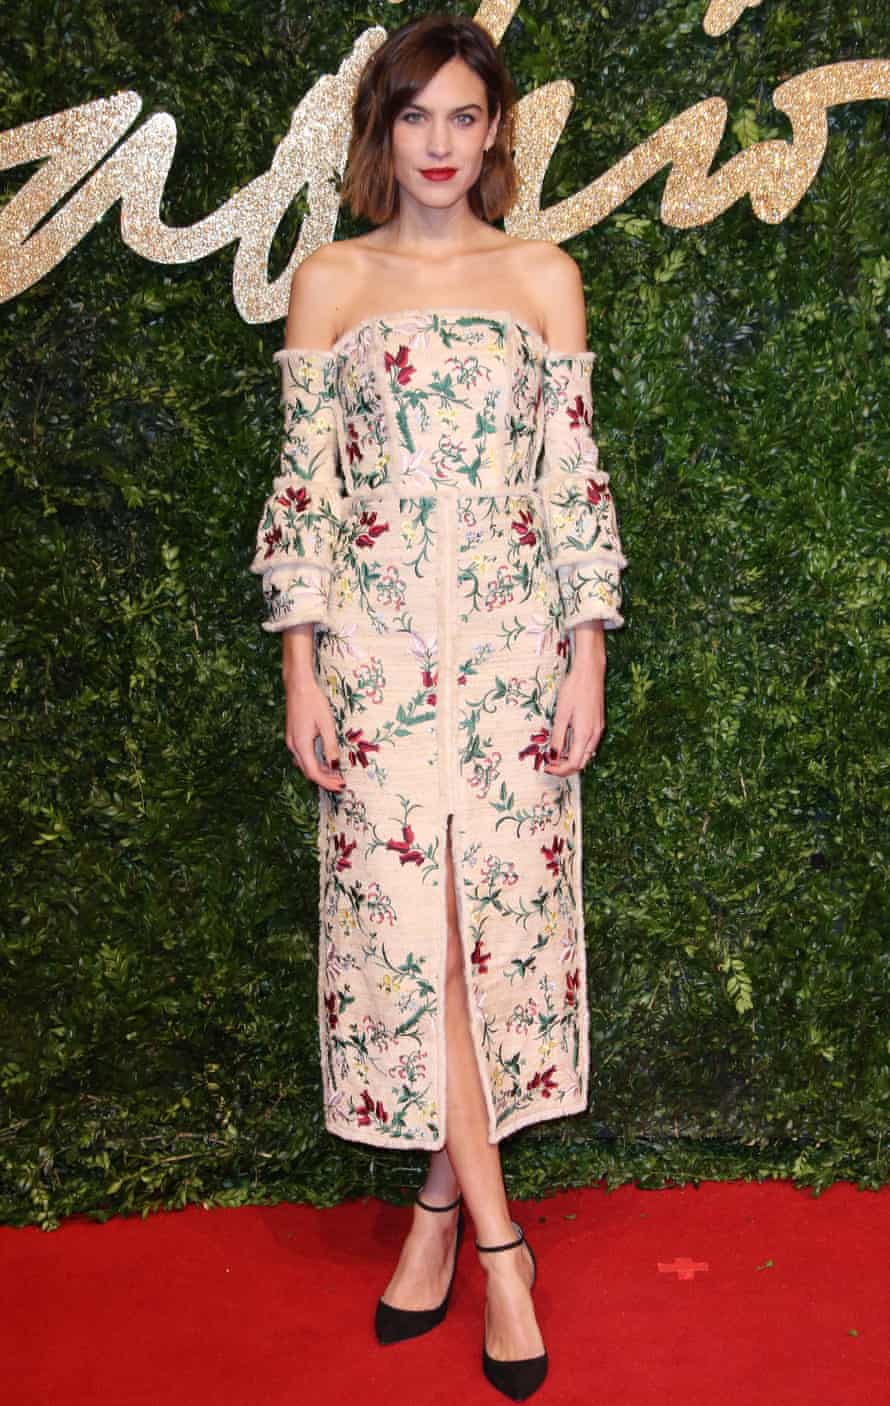 Adele eyeliner and no cleavage: the 2015 party dressing rules | Fashion ...